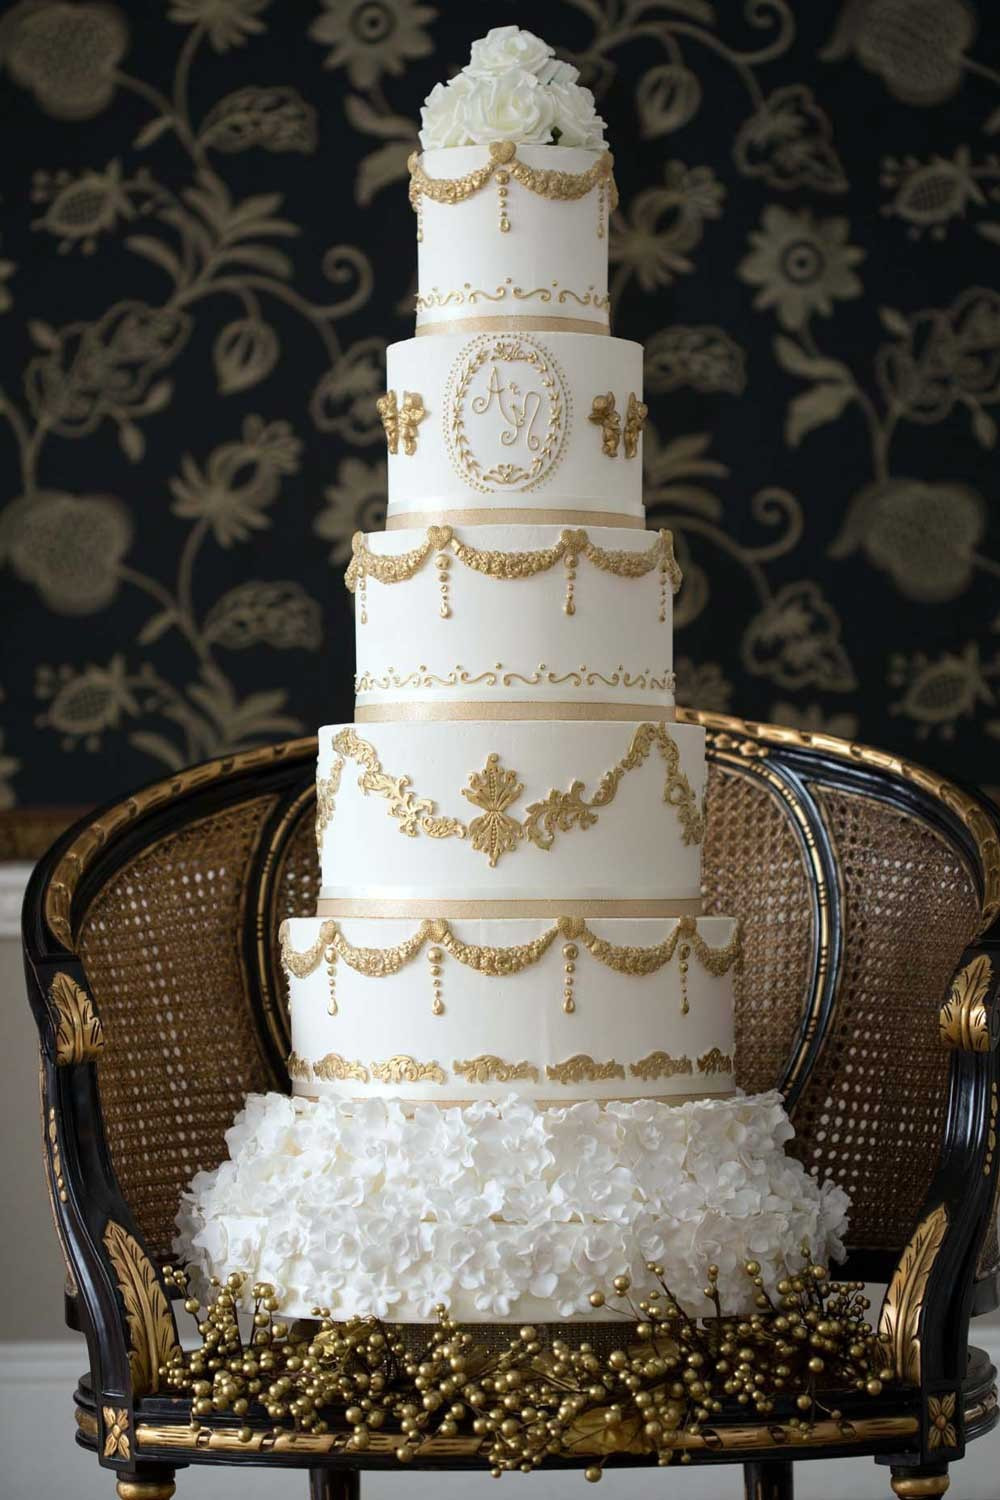 How Much Does Wedding Cake Cost
 Wedding Cake Prices Guide for bud s from £100 to over £